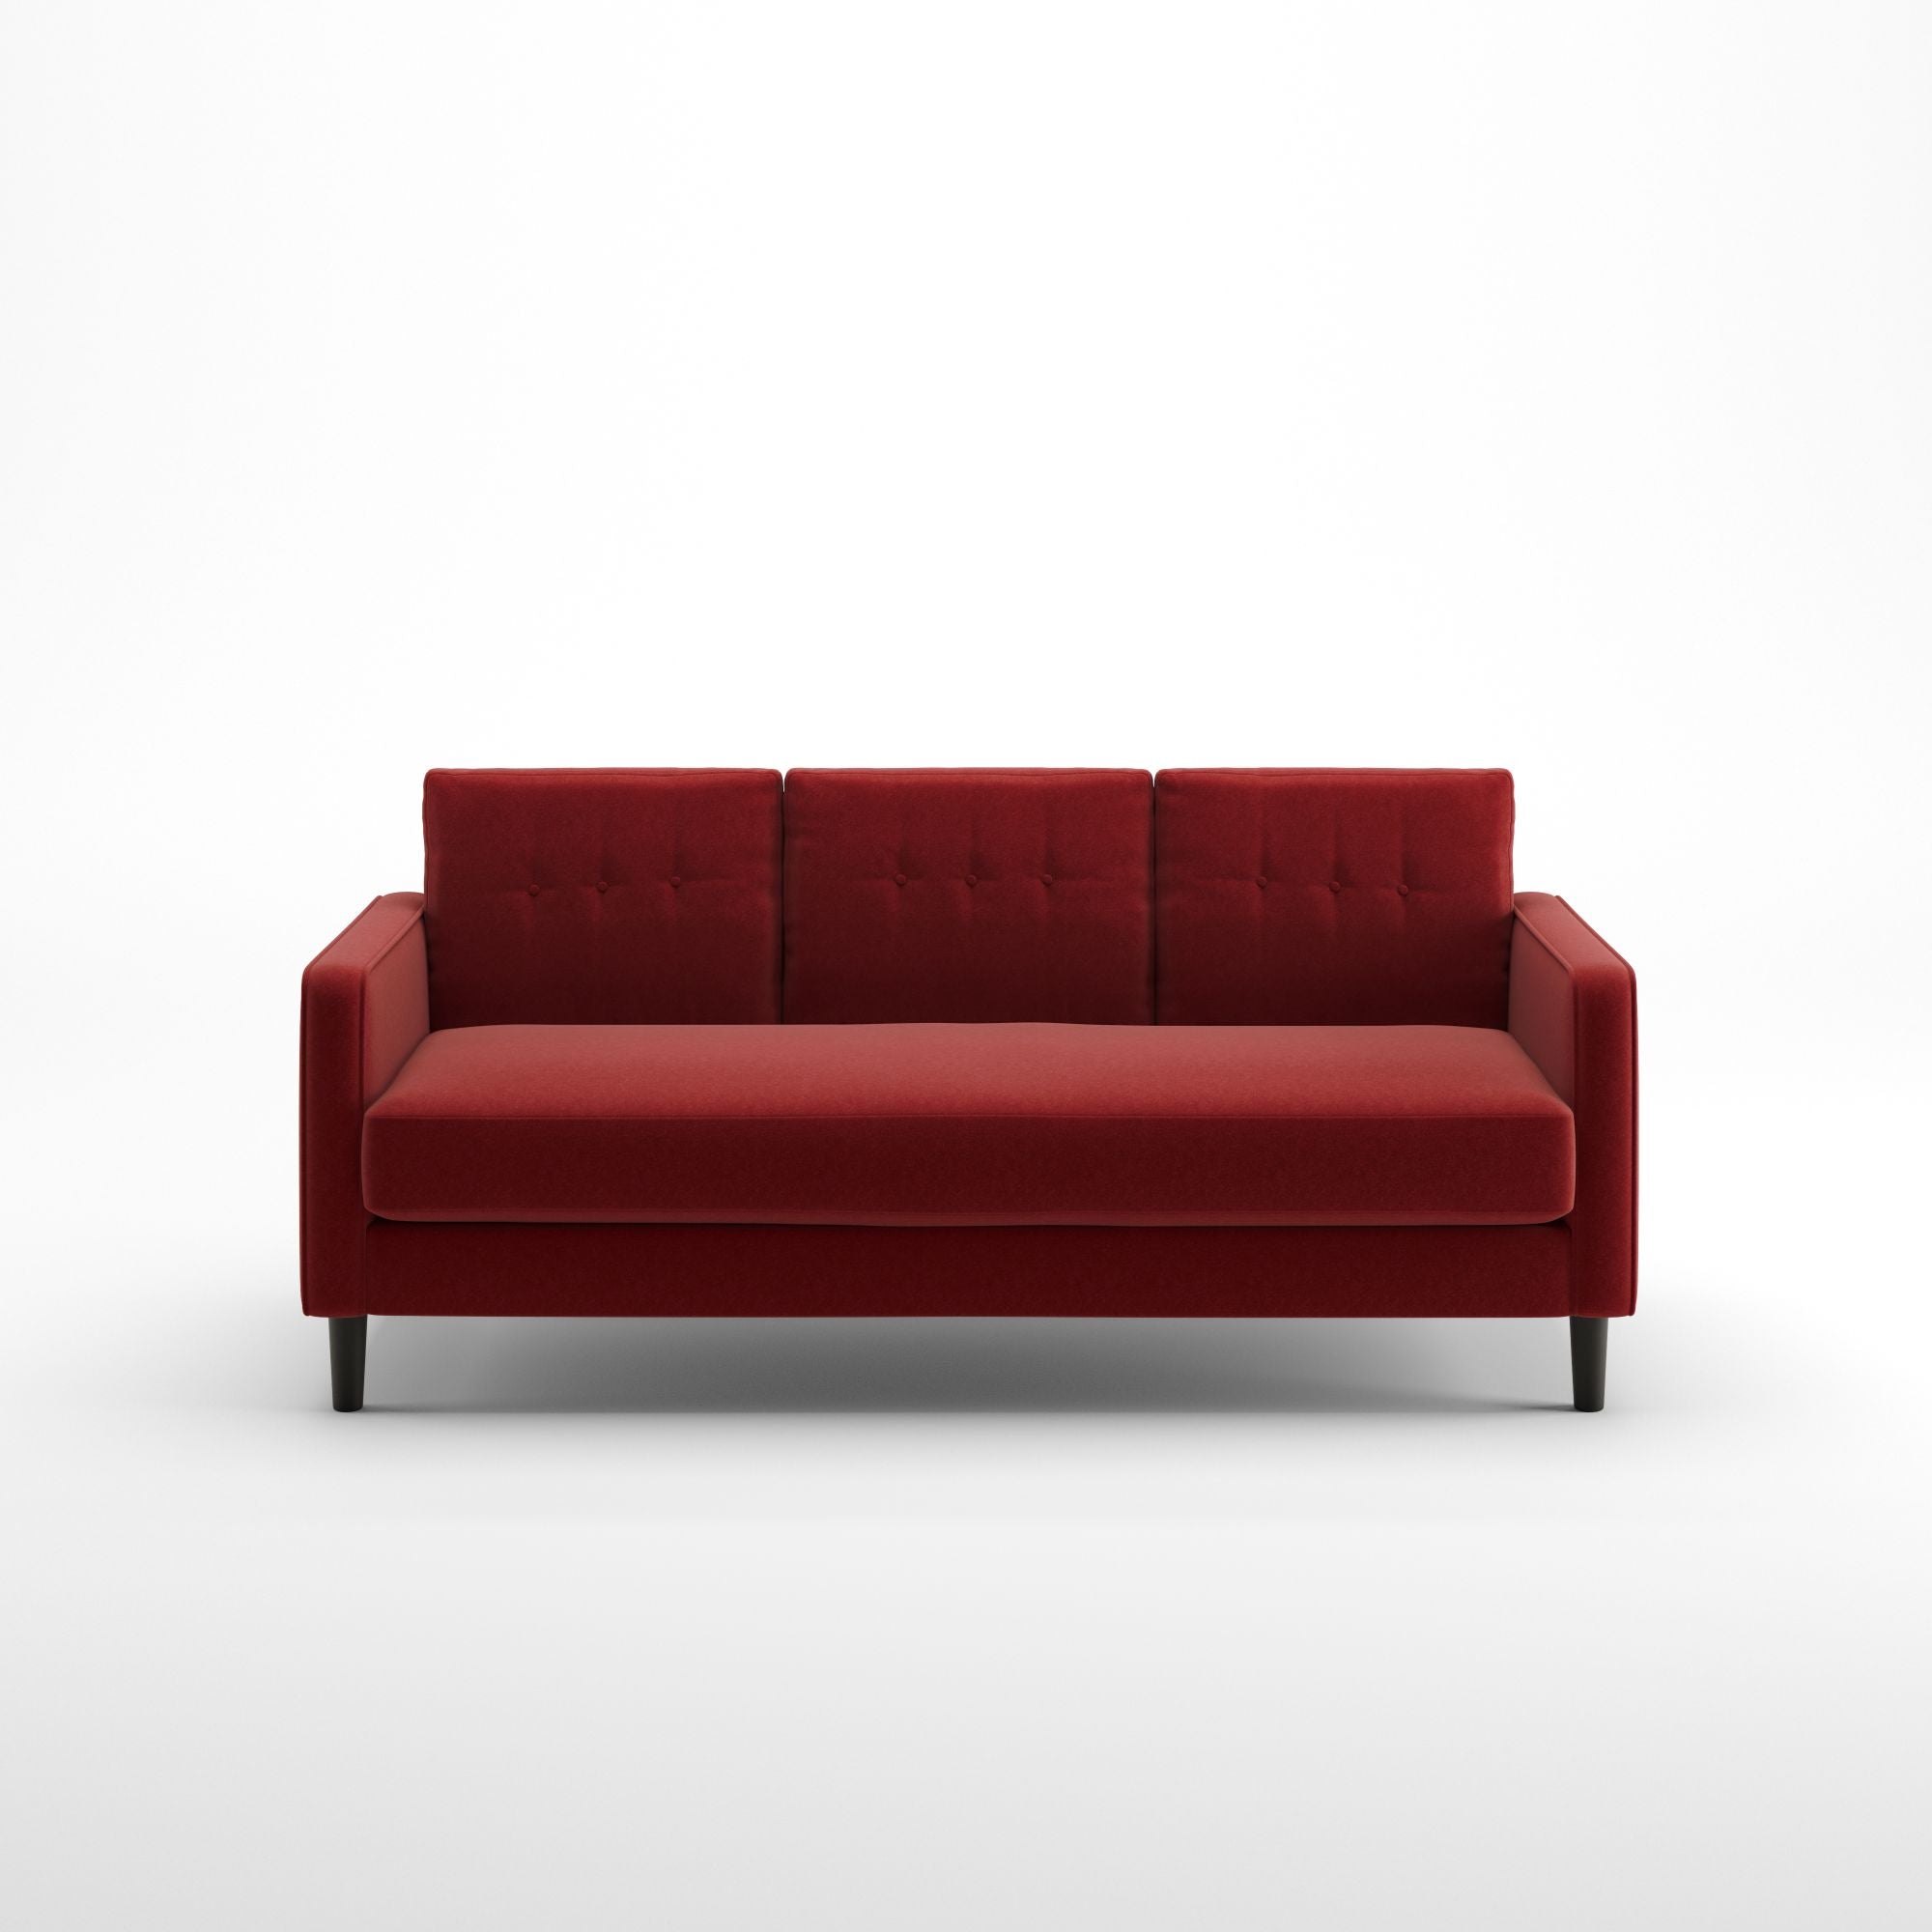 Zinus Mikhail Mid-Century Upholstered 76.4 Inch Sofa Ruby Red Weave